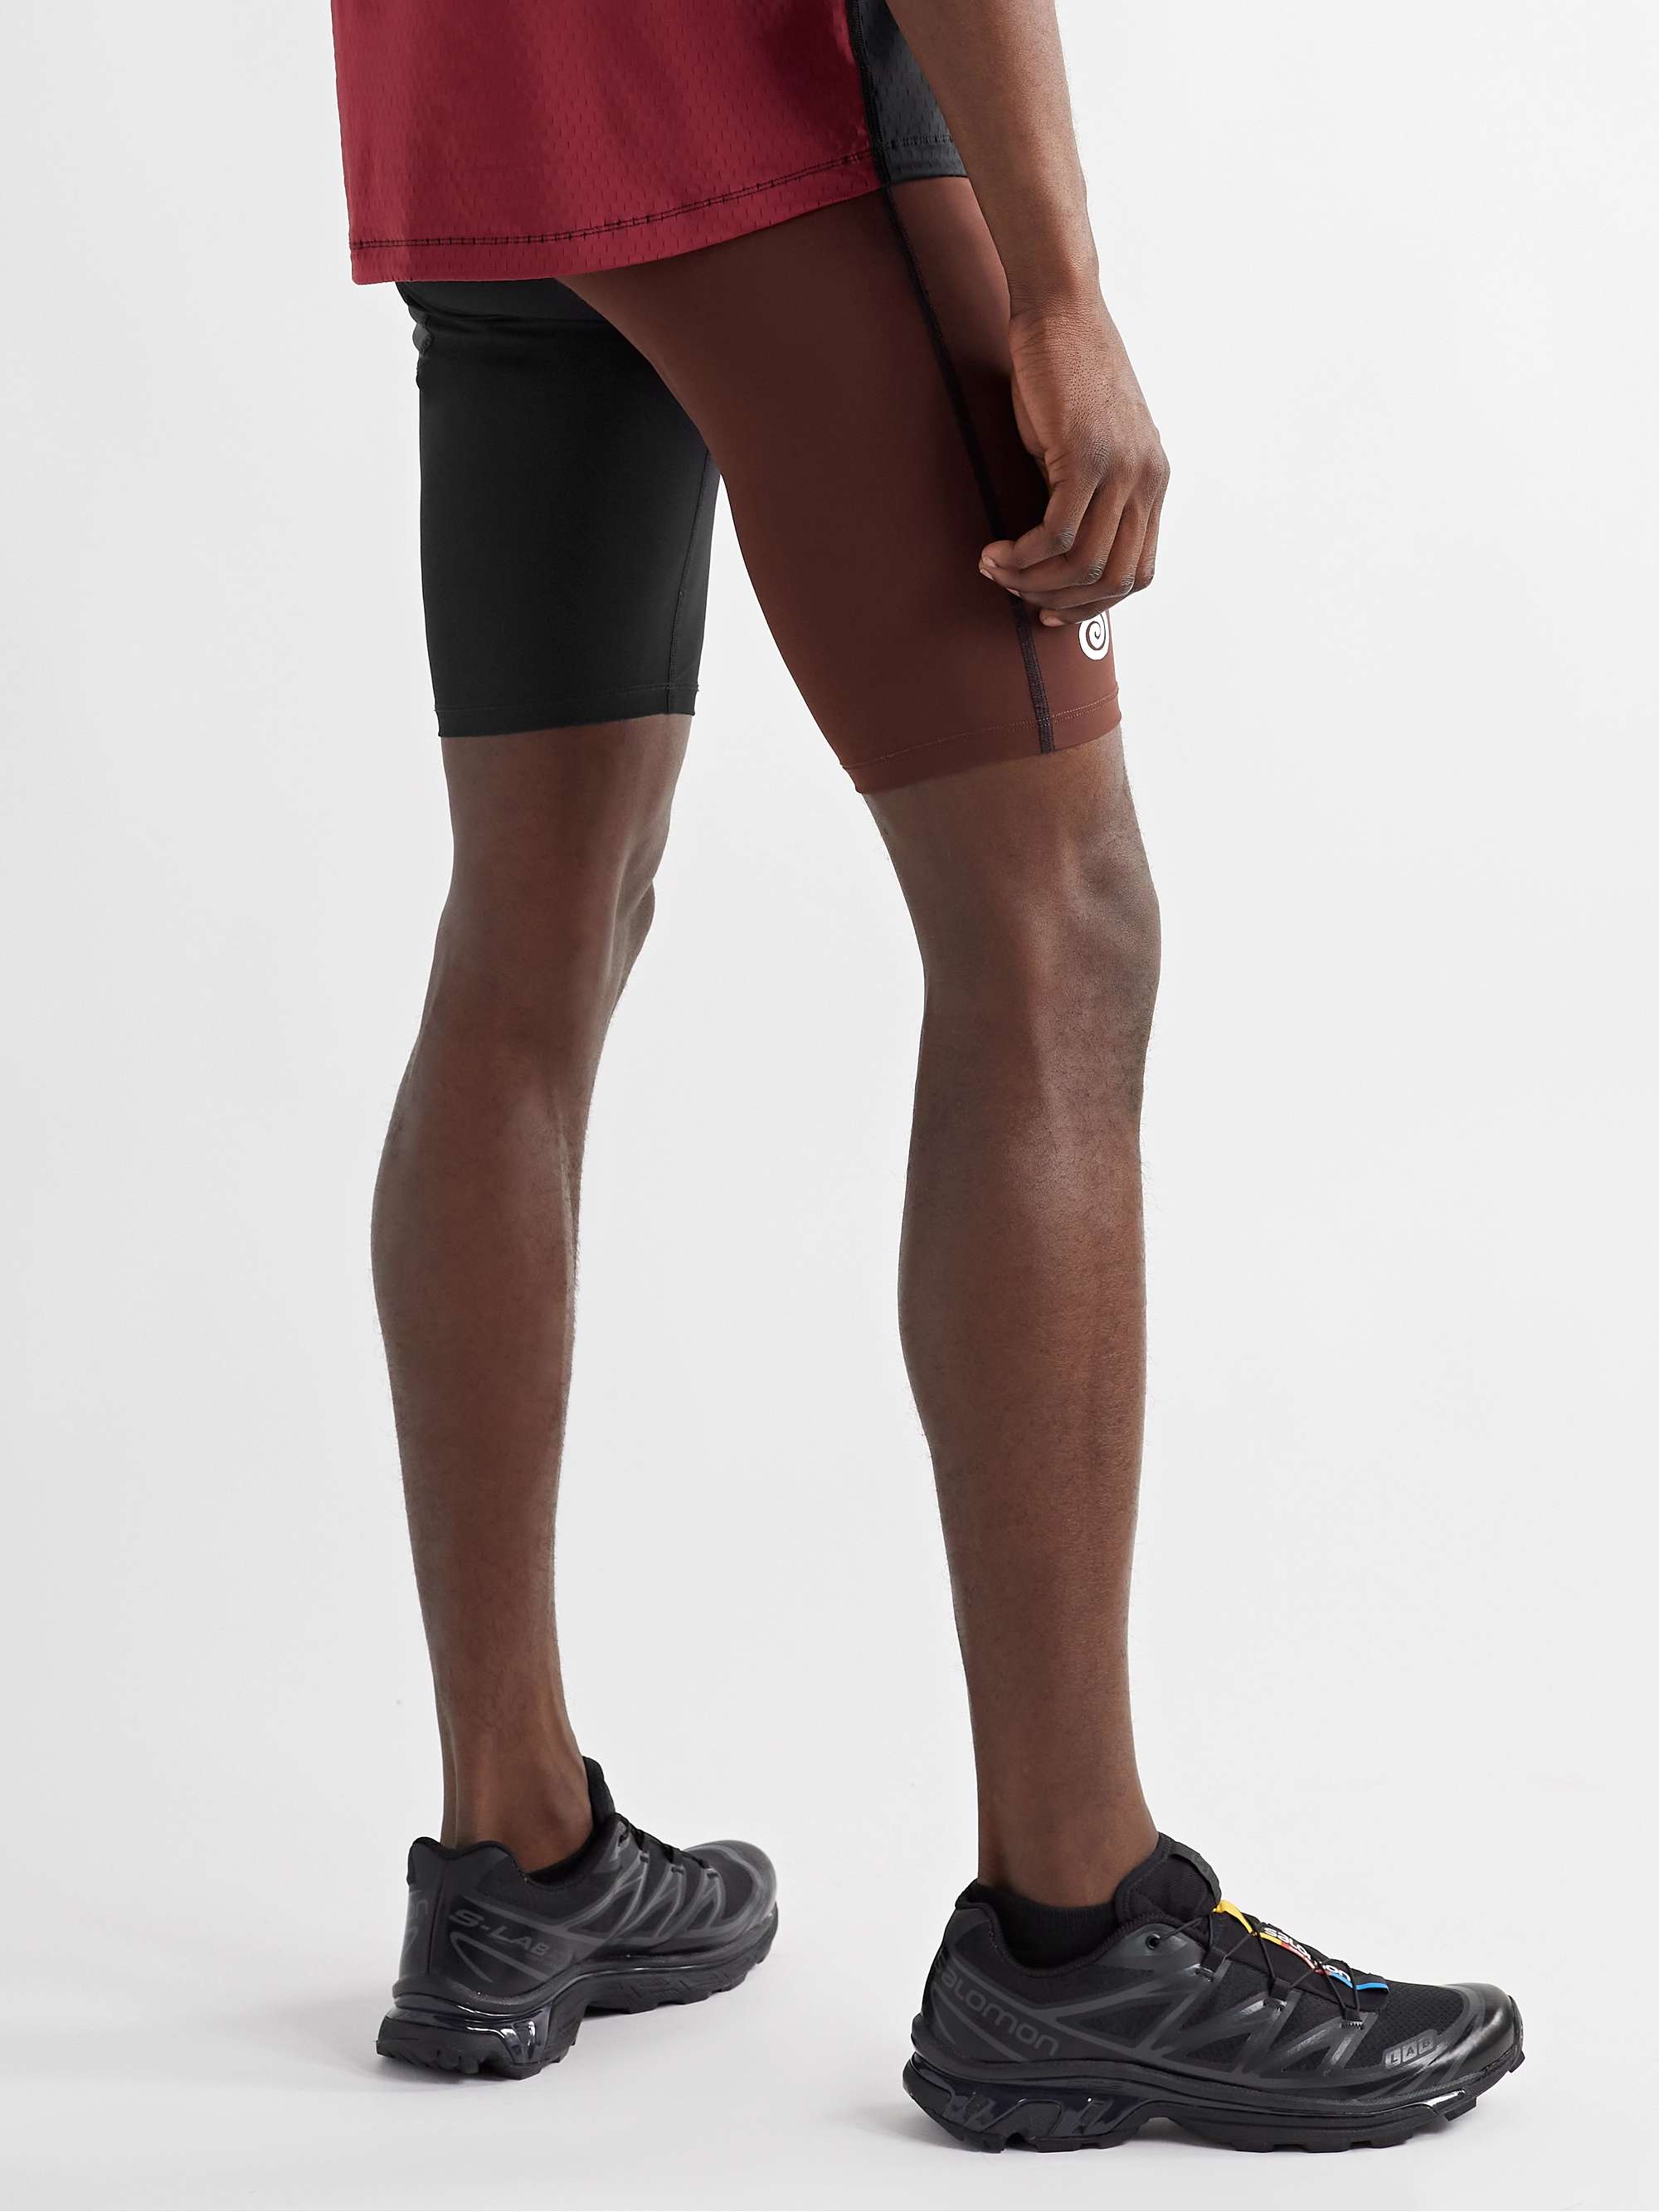 DISTRICT VISION TomTom Recycled Compression Running Shorts